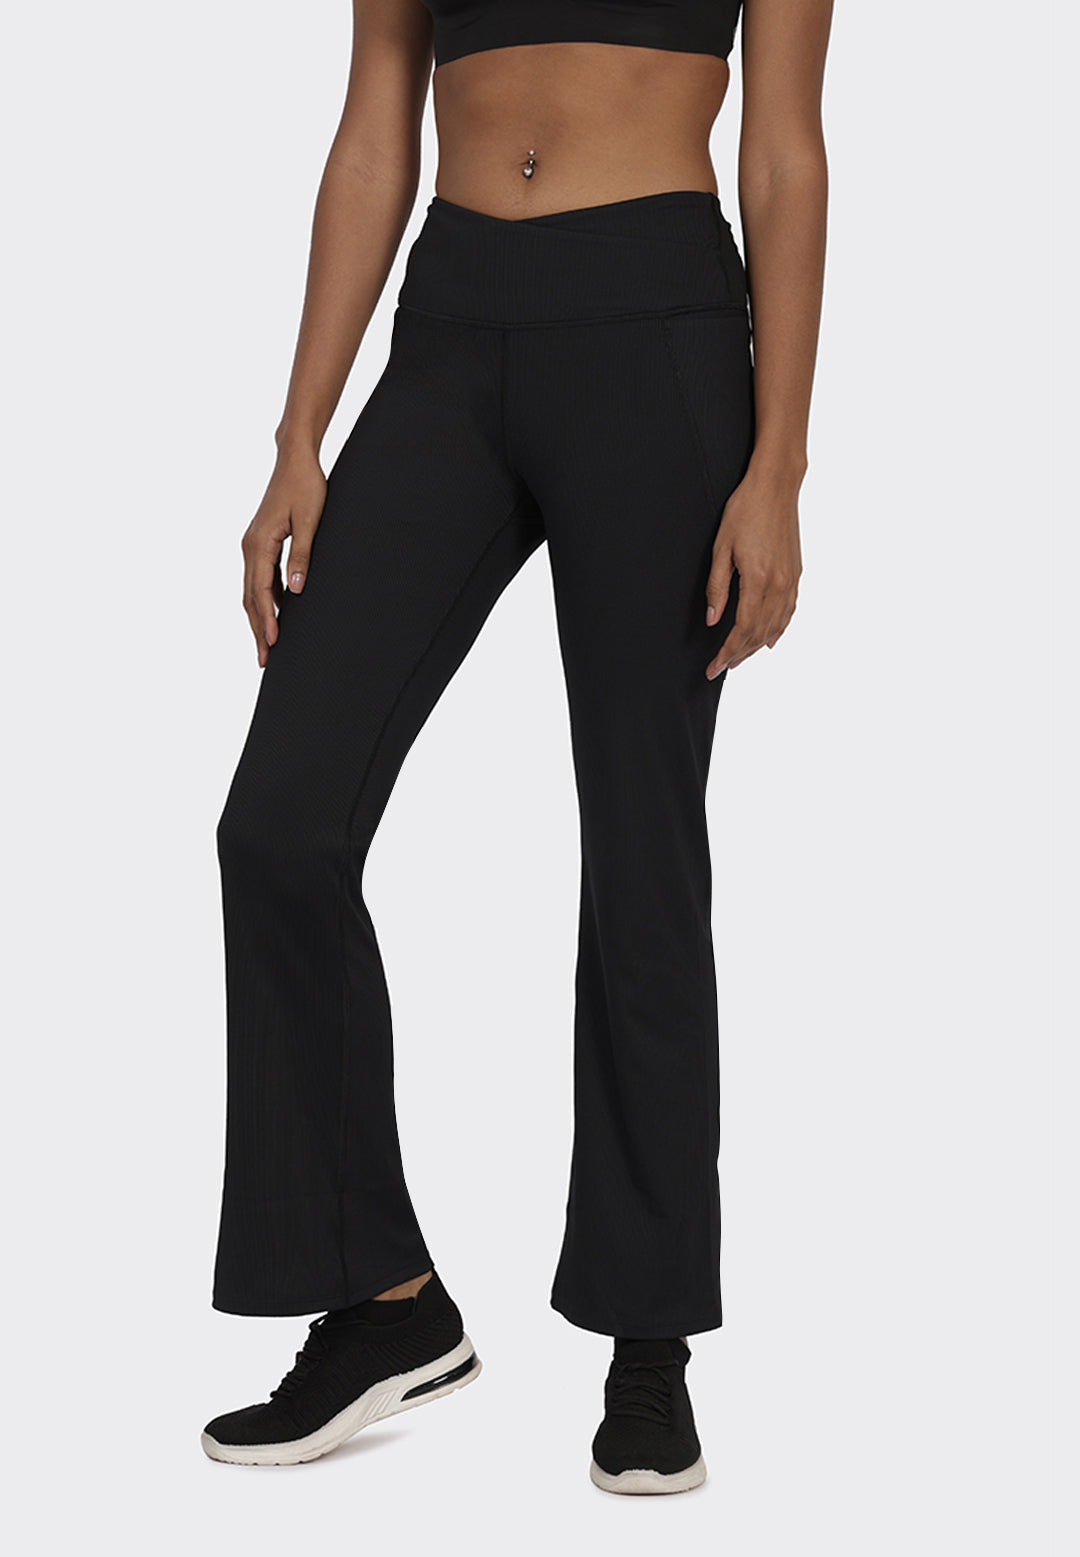 Overlap Ribbed Yoga Flare Pants with 2 Pockets